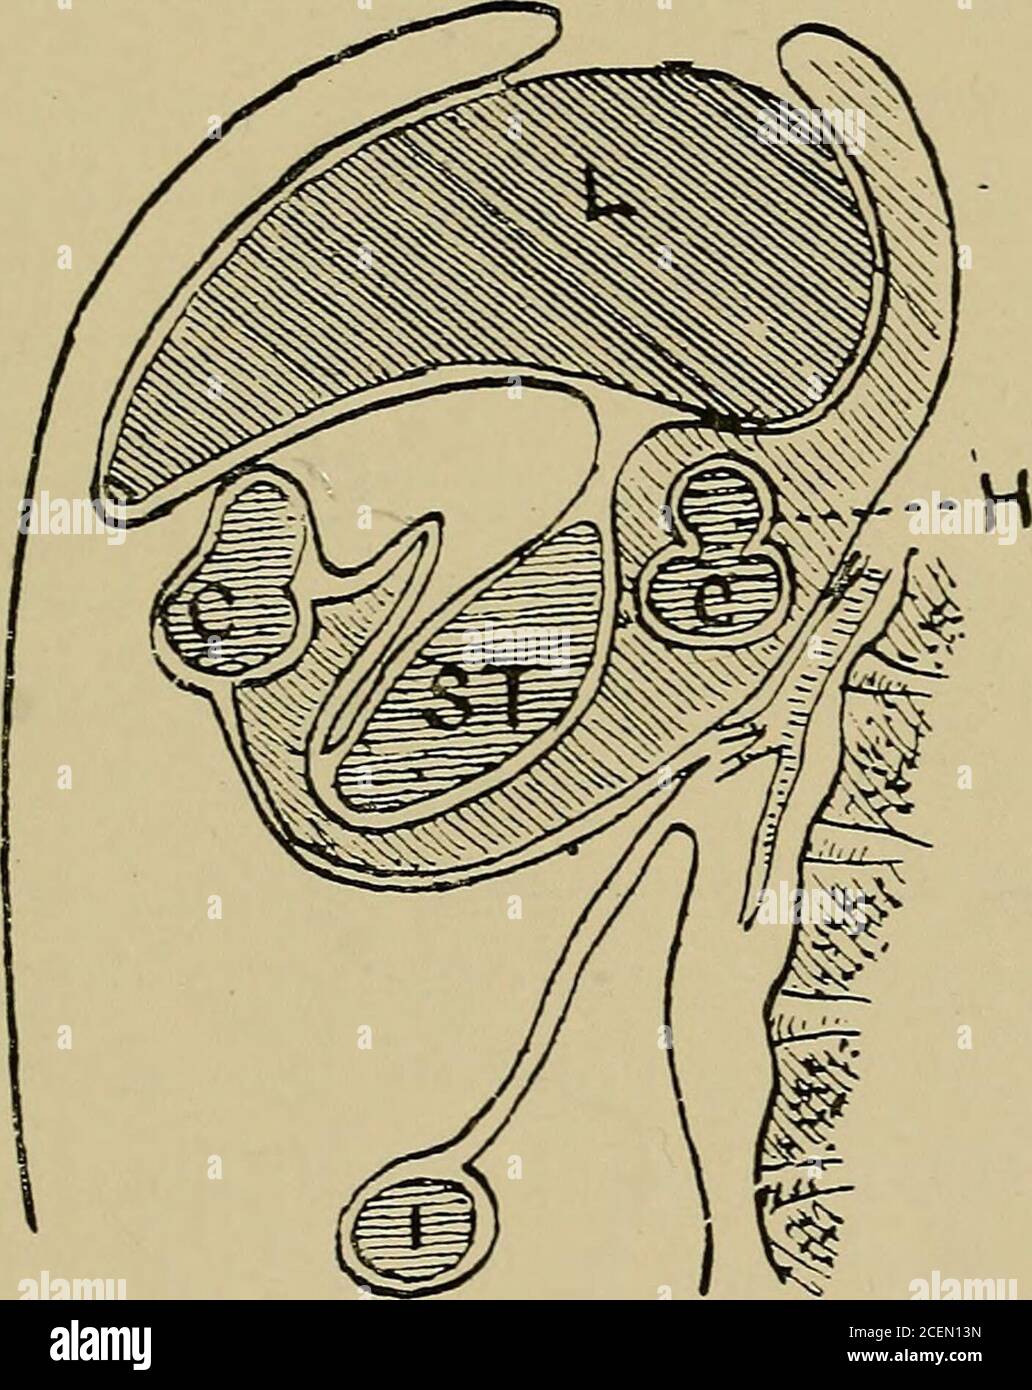 . On retro-peritoneal hernia : being the 'Arris and Gale' lectures on the 'The anatomy and surgery of the peritoneal fossae' : delivered at the Royal College of Surgeons of England in 1897. of a hepatic flexure. Therewas a considerable degree of peritonitis in the epigastric area,and a few fresh adhesions united the ascending colon to theliver. The liver showed no morbid change of any kind.The stomach was merely distended. All the other viscerawere perfectly normal. It was evident that the caecum was undescended, and had led the way through the foramen. HERNIA INTO THE FORAMEN OF WIN SLOW 155 Stock Photo